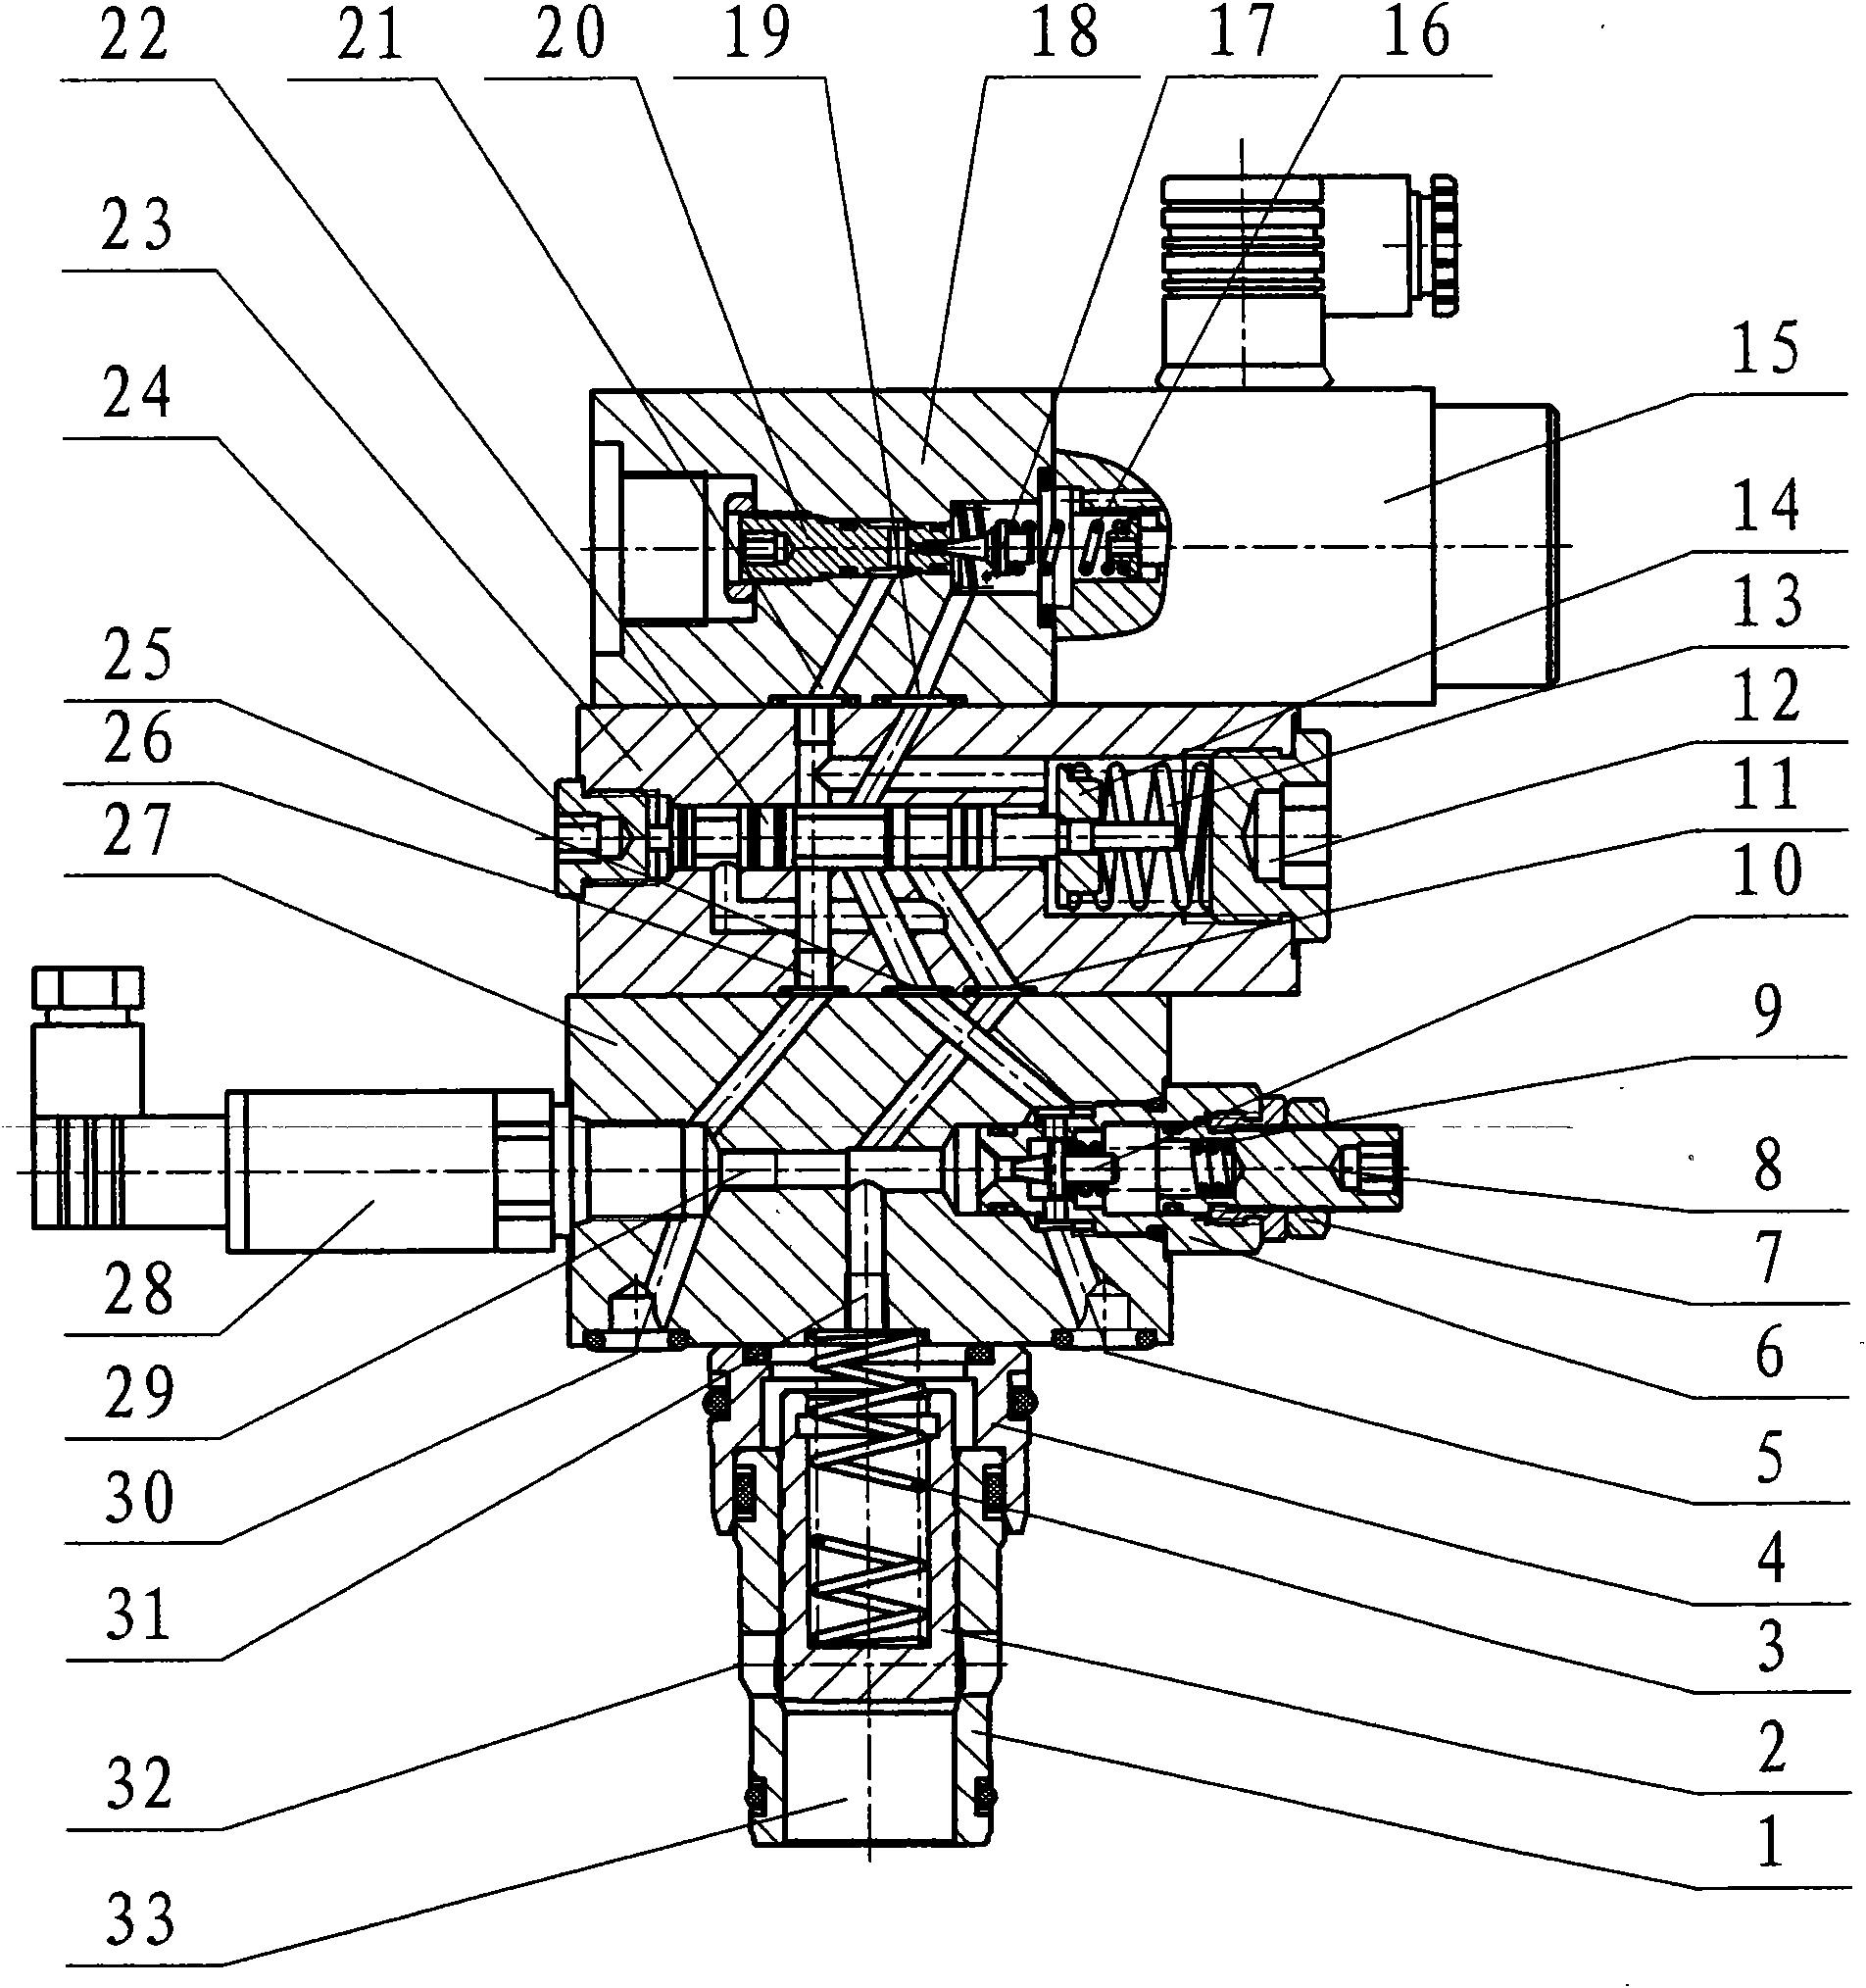 Pressure feedback secondary pilot control plugged-in type proportion relief valve system